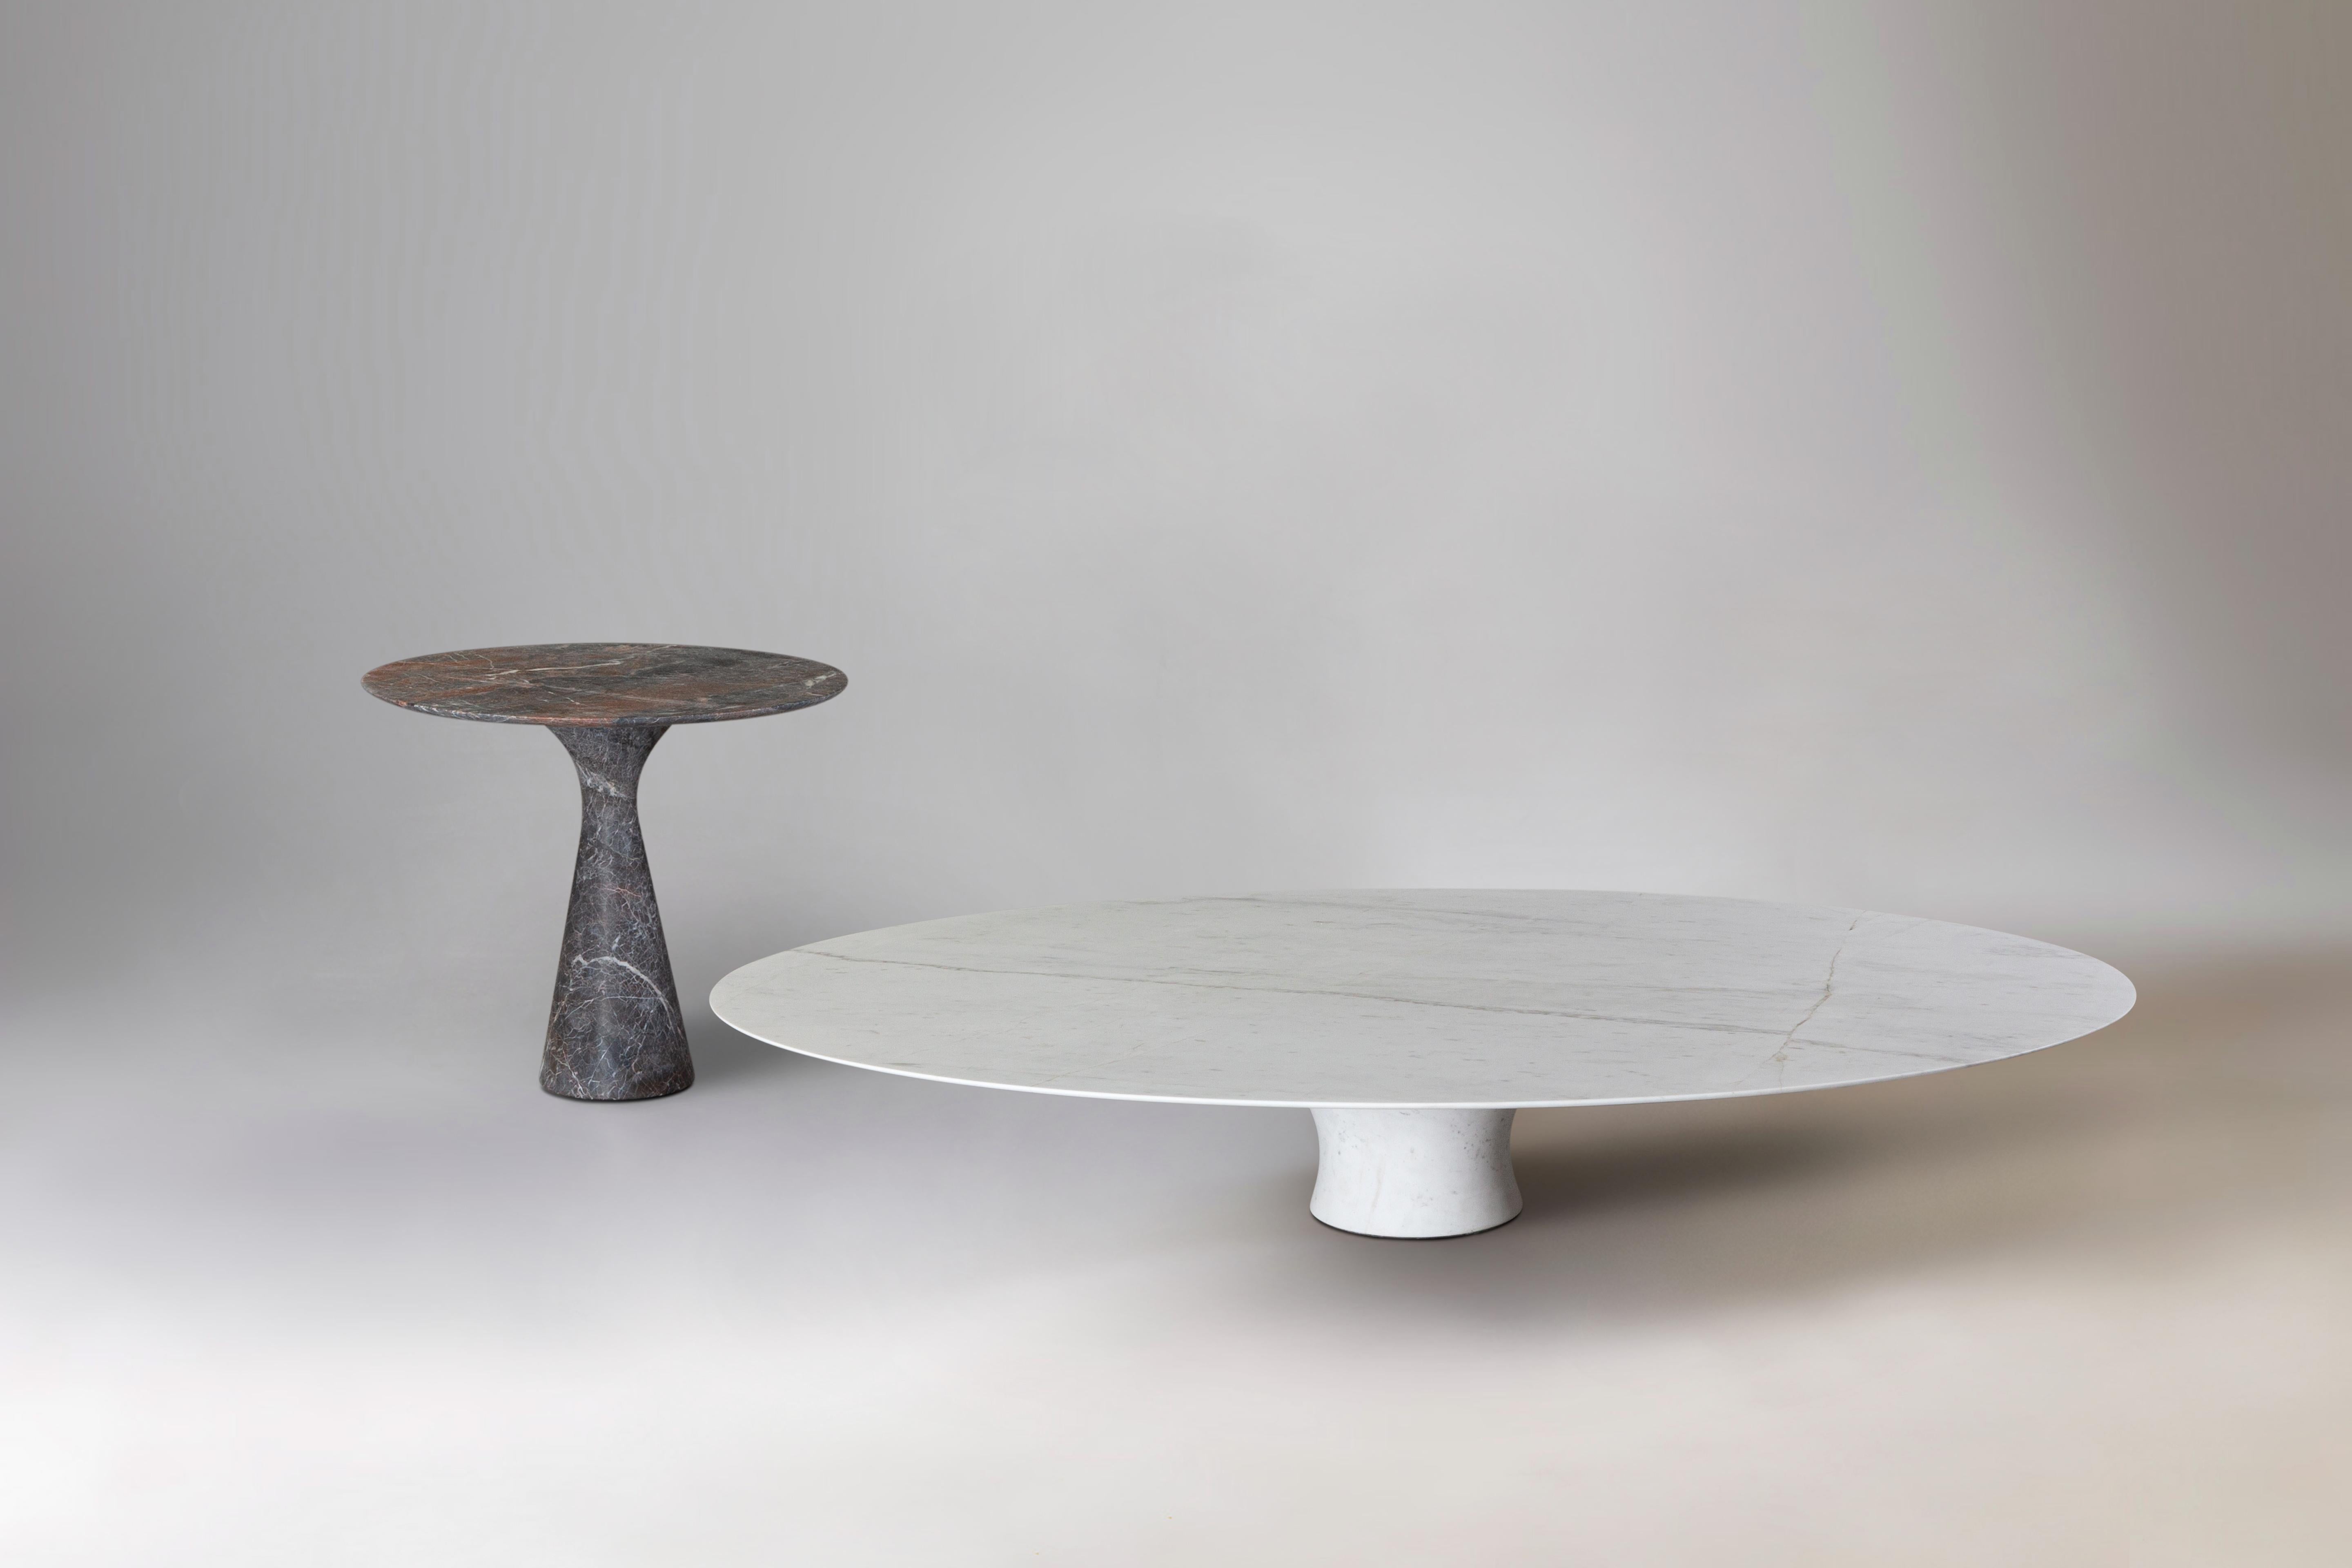 Set of Refined Contemporary Marble Oval Low Table and Side Table
Dimensions: 130 x 27 cm/ 45 x H 62 cm 
Materials: Kynos, Grey Saint Laurent

Angelo is the essence of a round table in natural stone, a sculptural shape in robust material with elegant